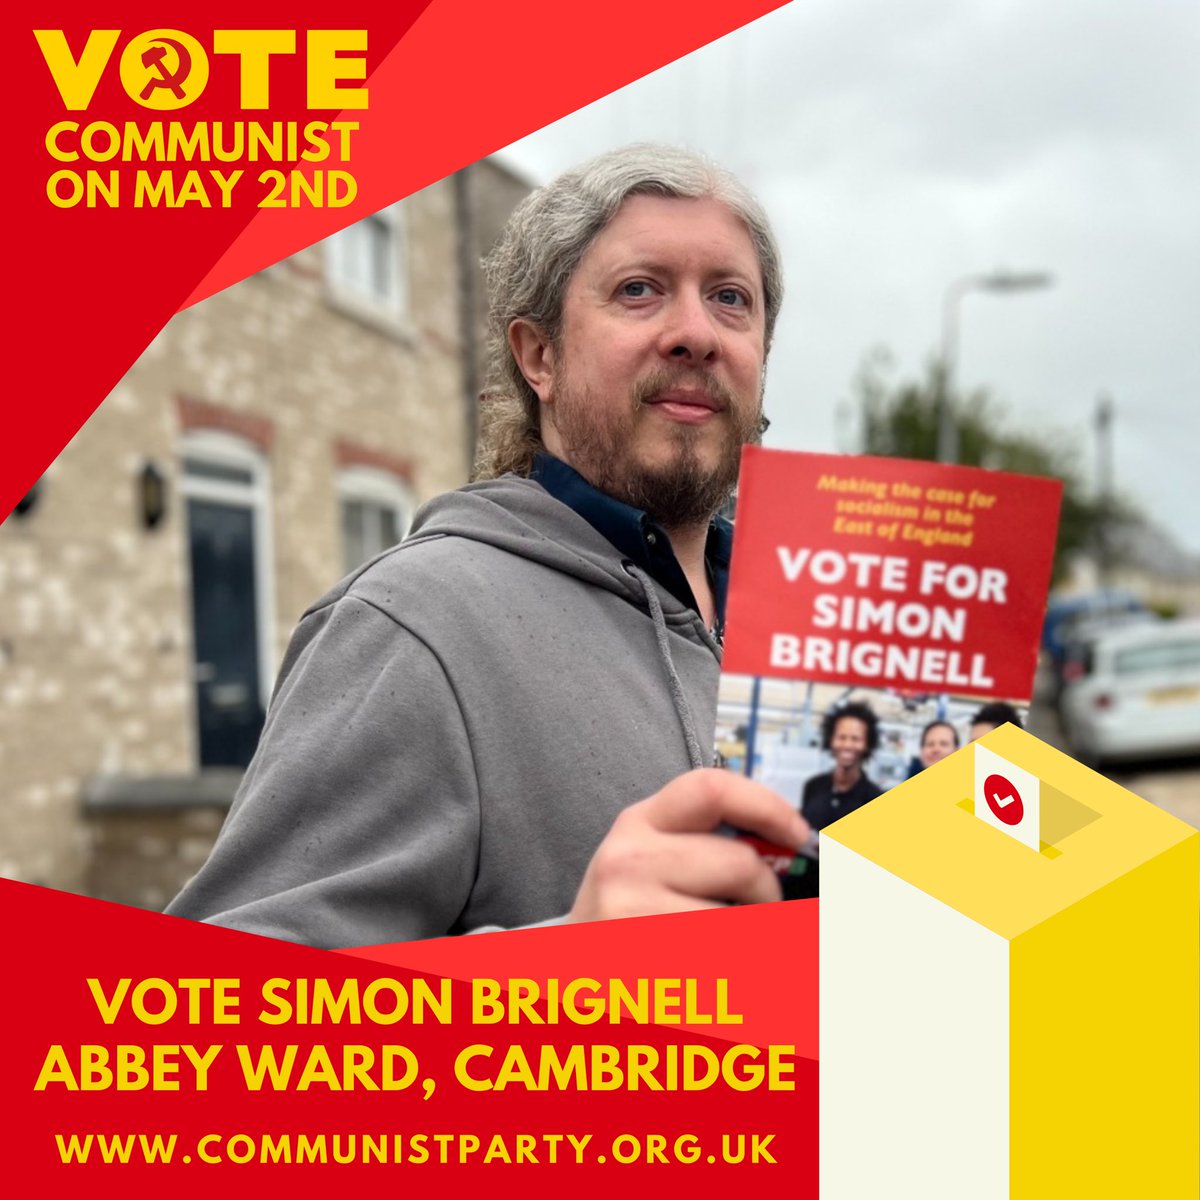 Vote, Campaign, Join: for the working class! #VoteCommunist on May 2nd 🗳️🚩 “Working class people need and deserve better. We won't put up with being blamed and made to pay for a crisis caused by capitalism. Vote for change, join us” says engineer and Abbey Ward candidate for